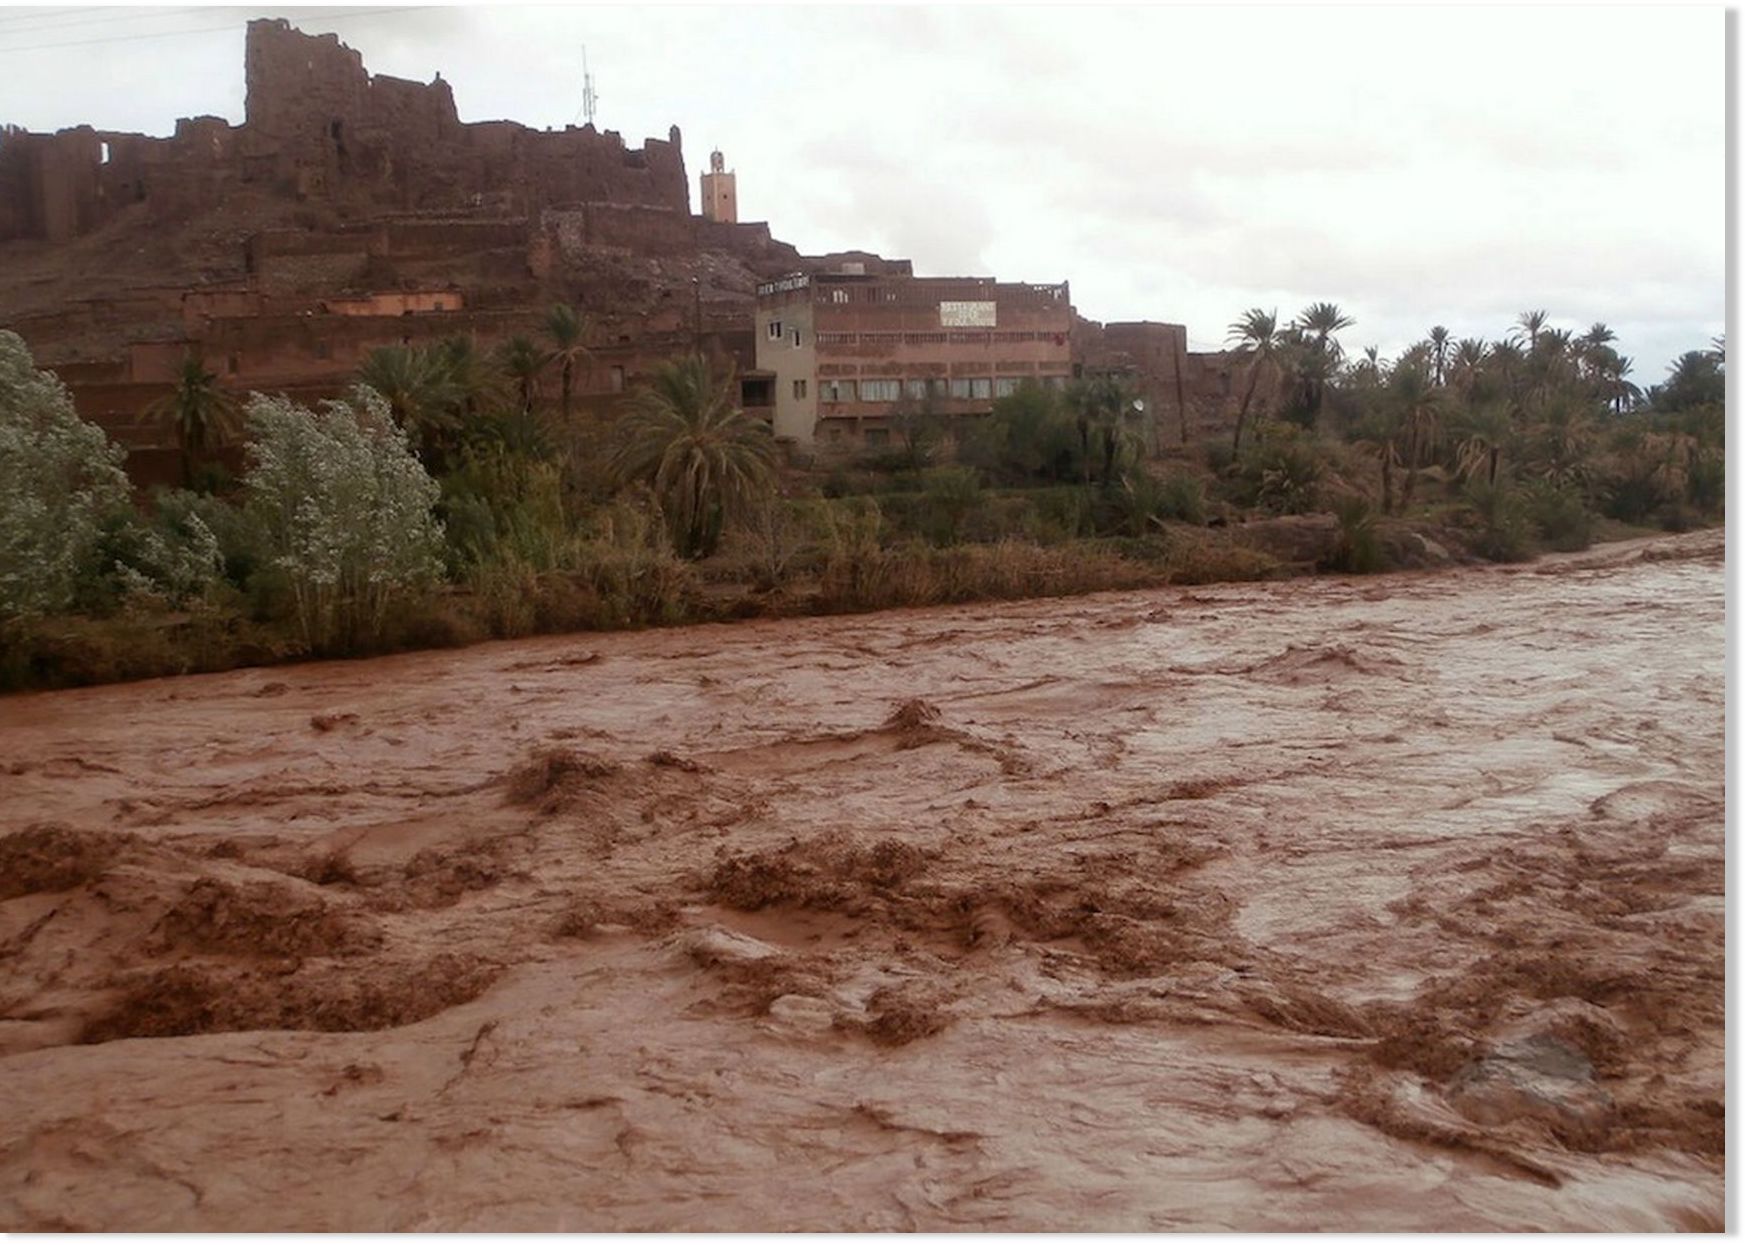 Floods in Morocco kill 17 with dozens missing after heavy rain destroys